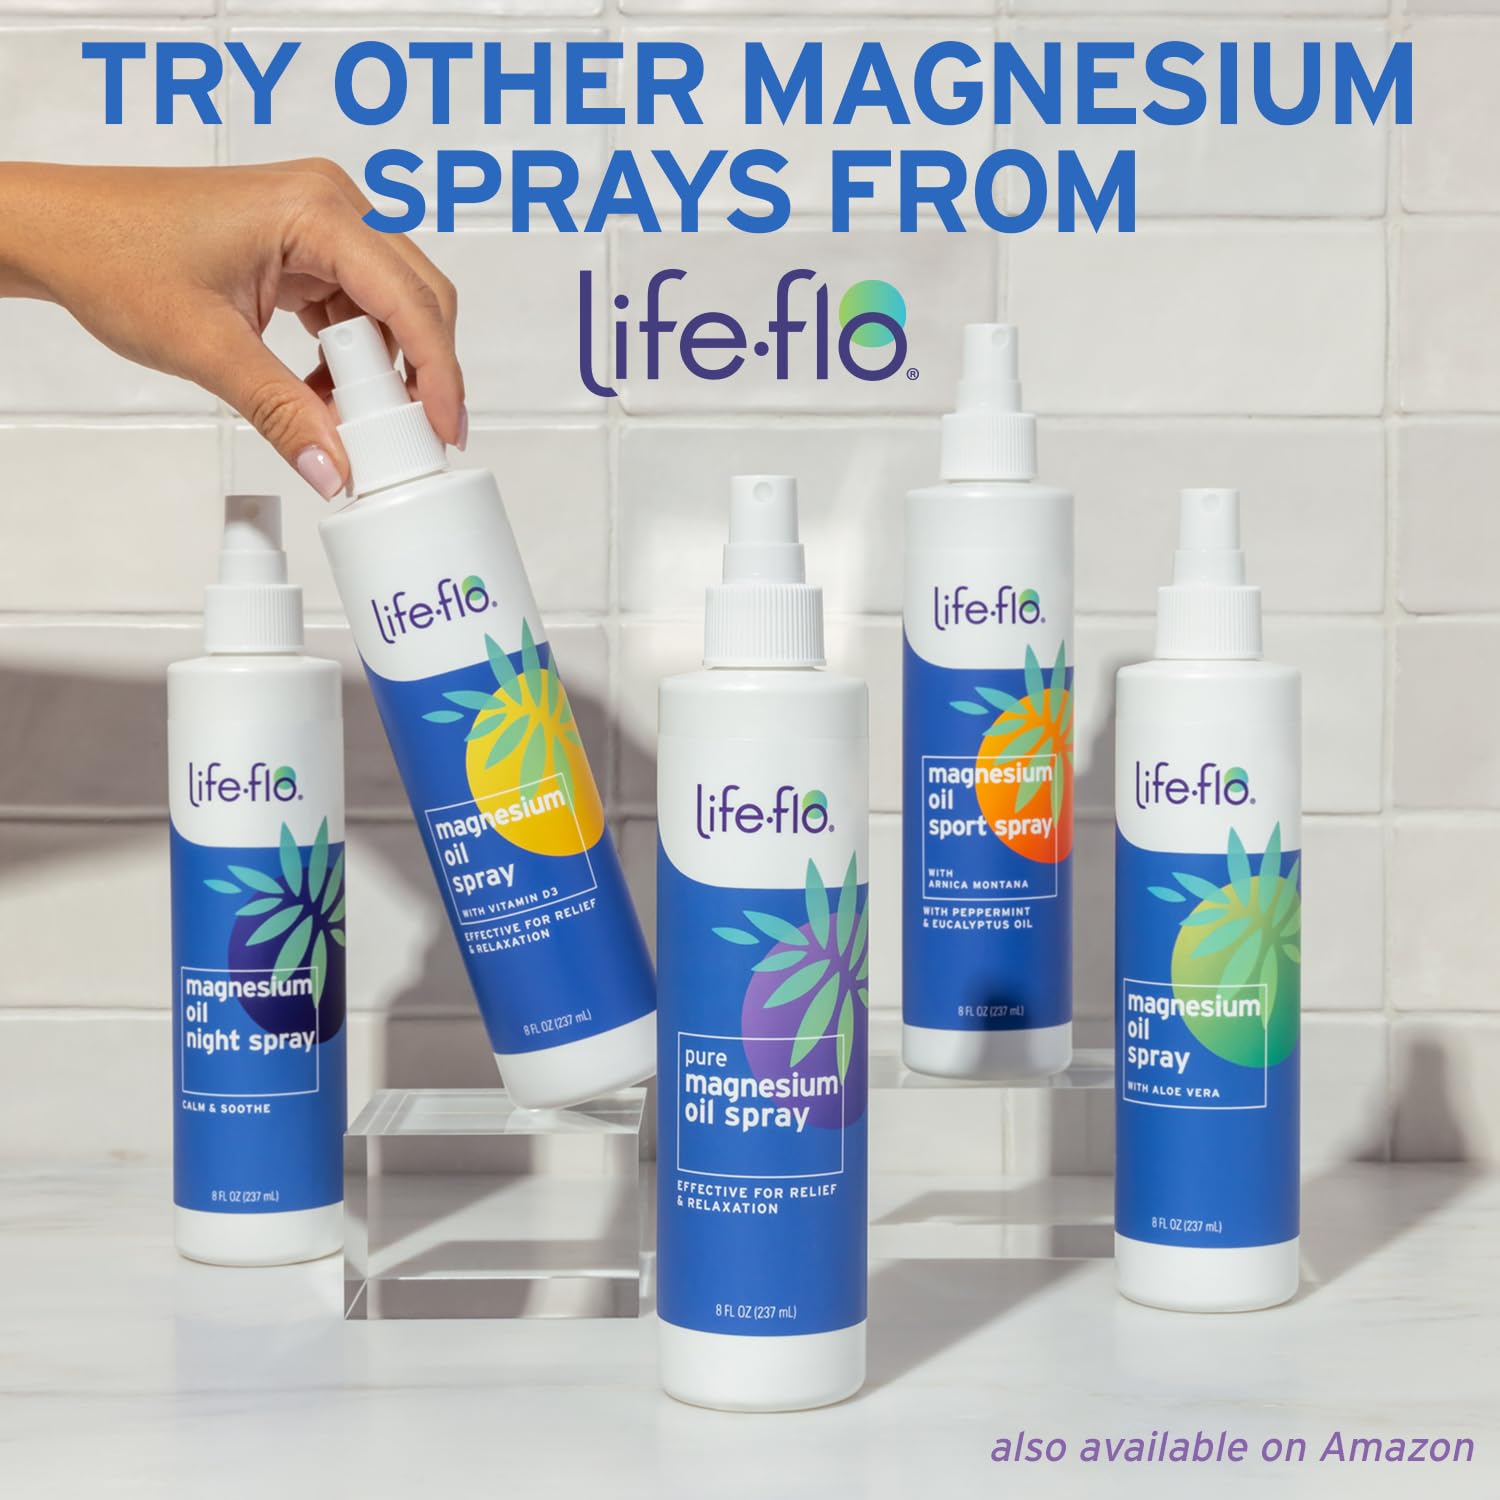 Life-flo Pure Magnesium Oil Spray w/Concentrated Magnesium Chloride from The Zechstein Seabed, Calming Relief and Relaxation, Soothes Muscles and Joints, 60-Day Guarantee, Not Tested on Animals, 8oz